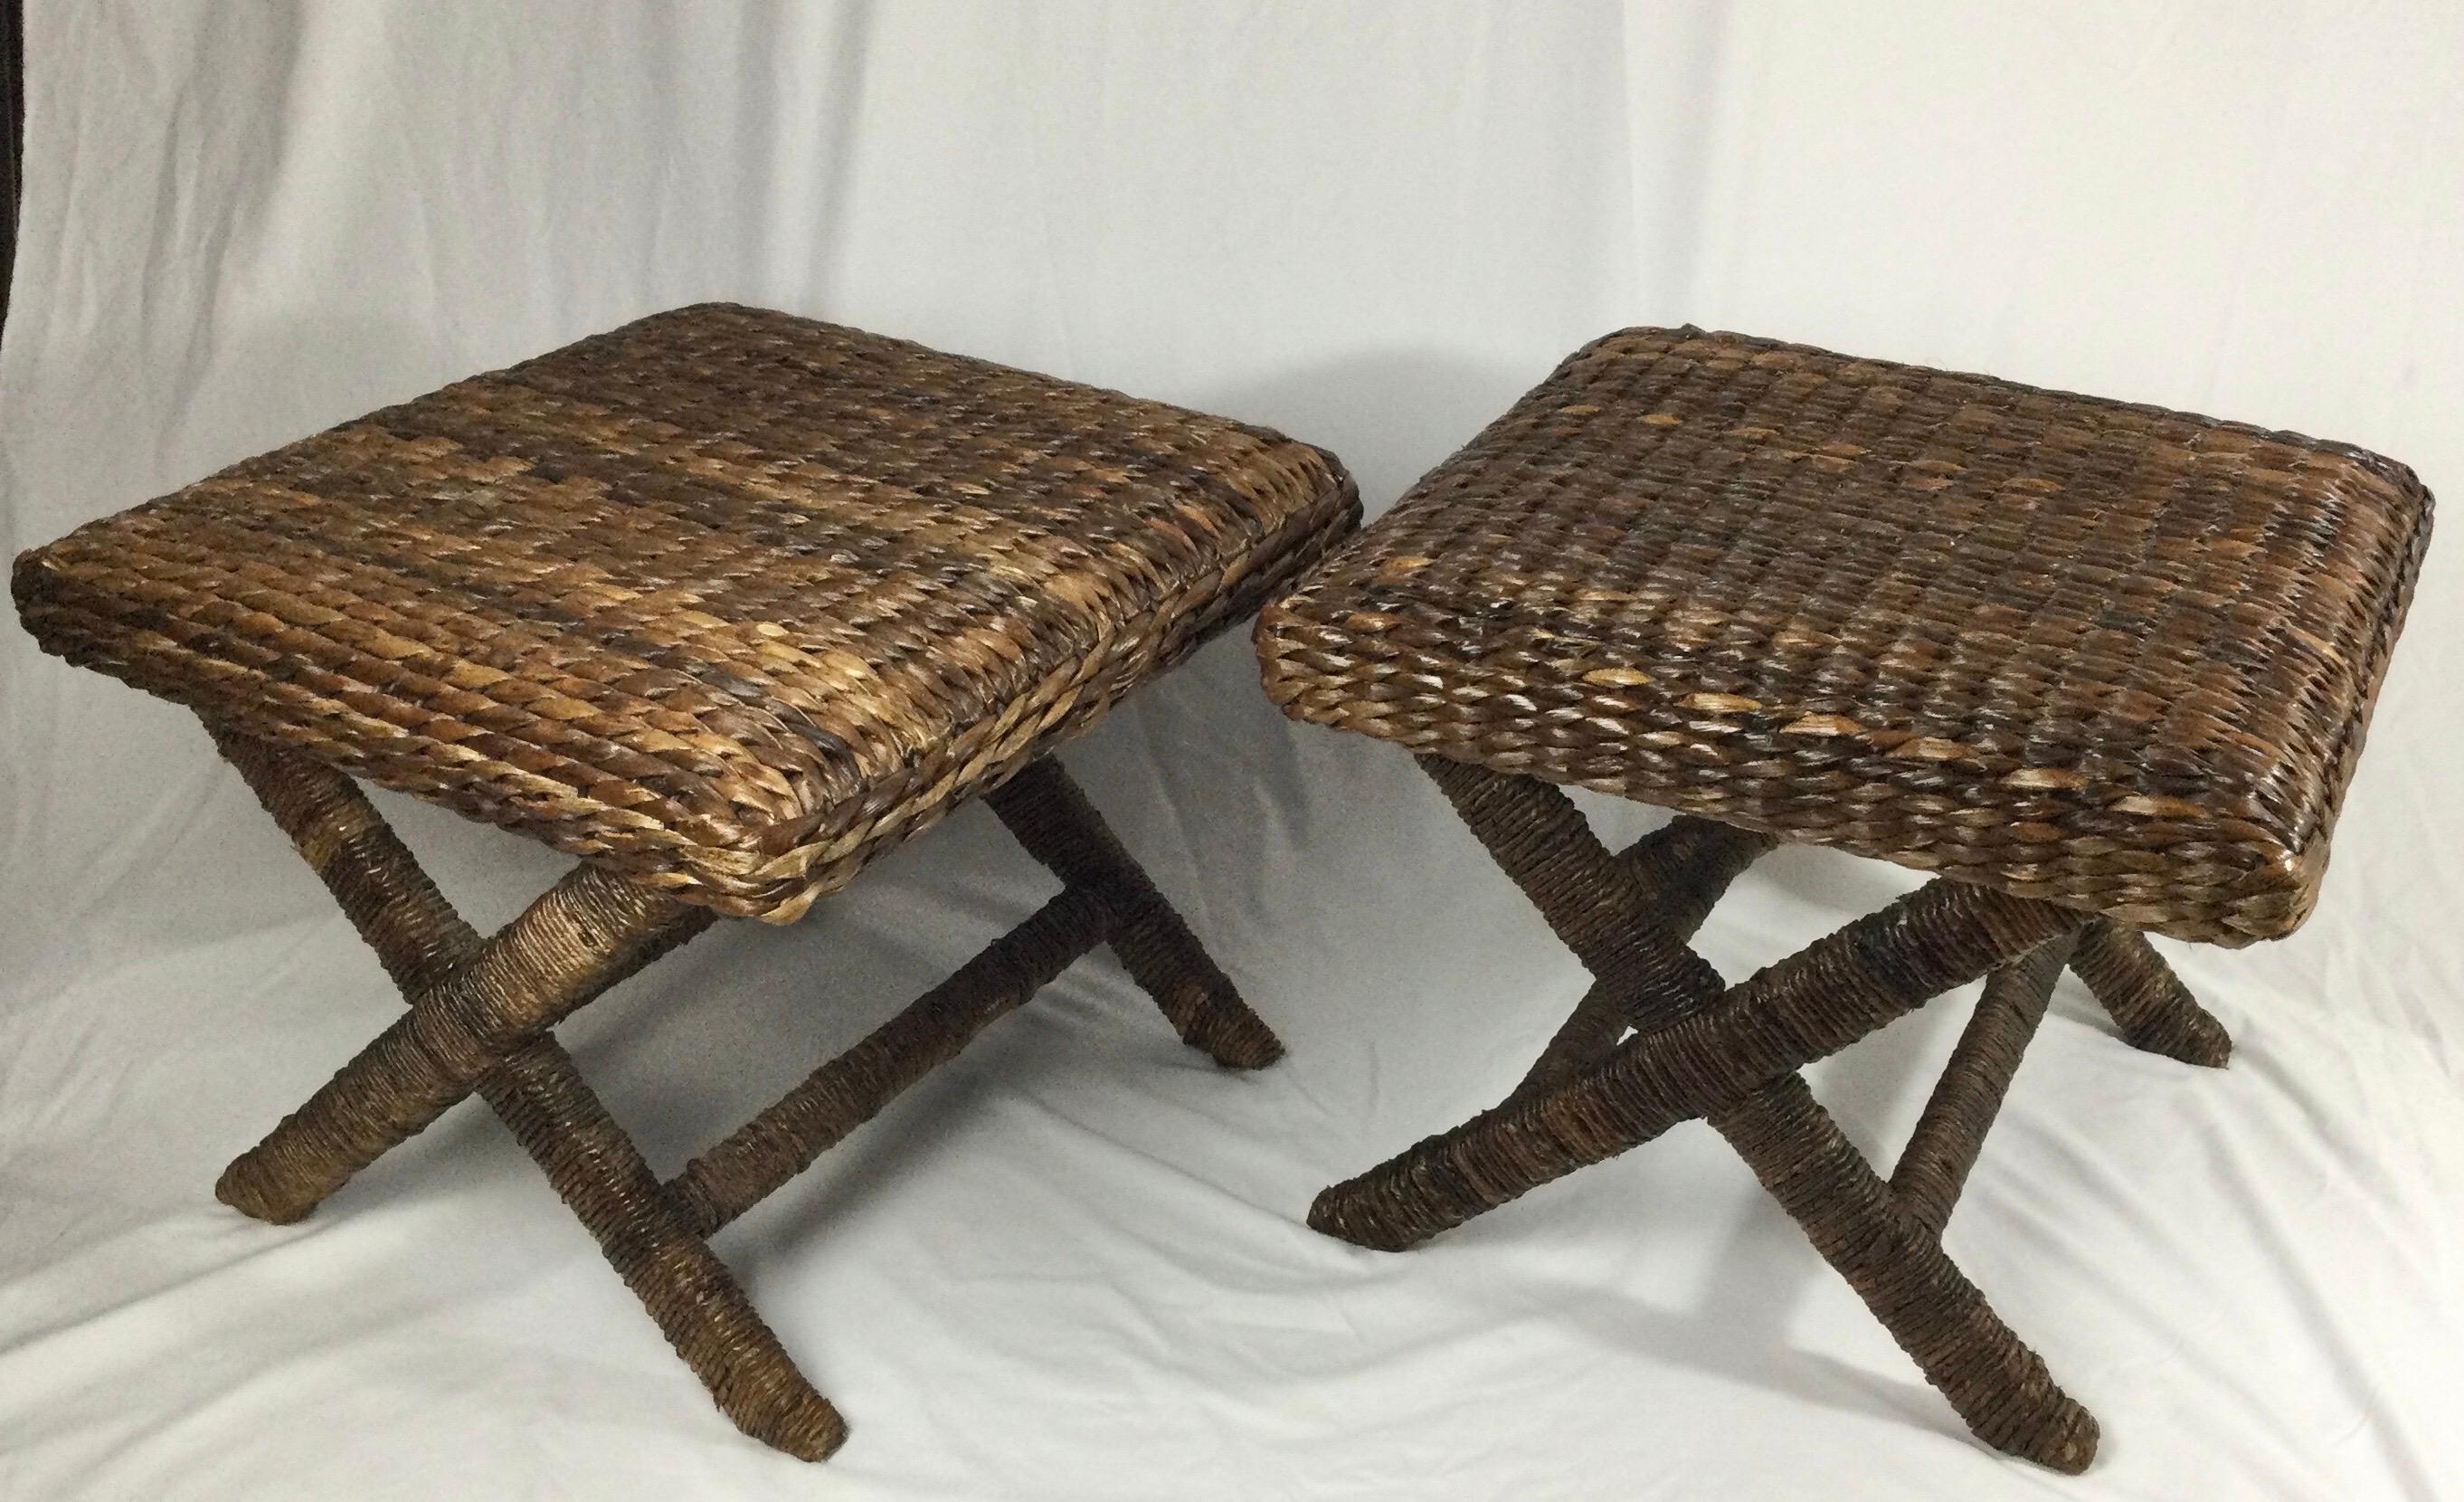 Great pair of X base benches. Natural woven rattan seat with contrasting wrapped legs and cross bar. Nice size, 20 by 20 by 17